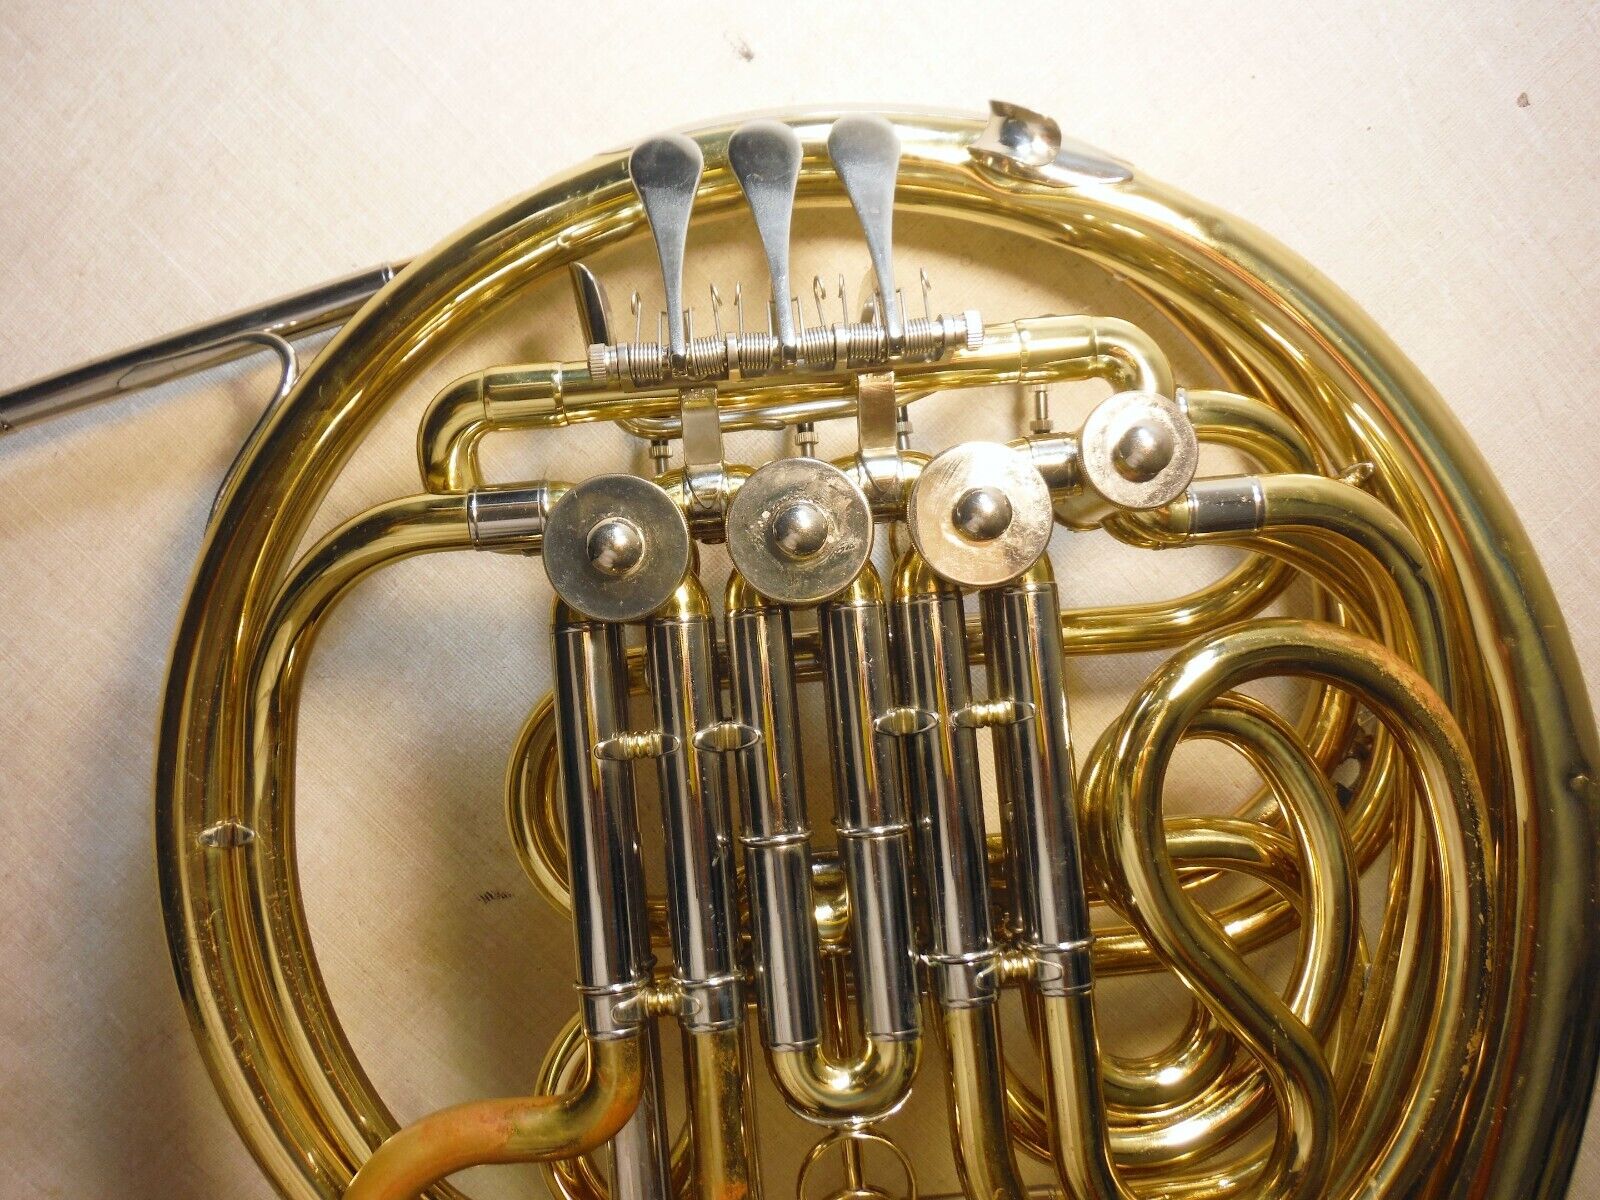 JUPITER JHR-852 DOUBLE FRENCH HORN BRASS WORKING GOOD W/DENTS CASE MOUTHPIECE 4